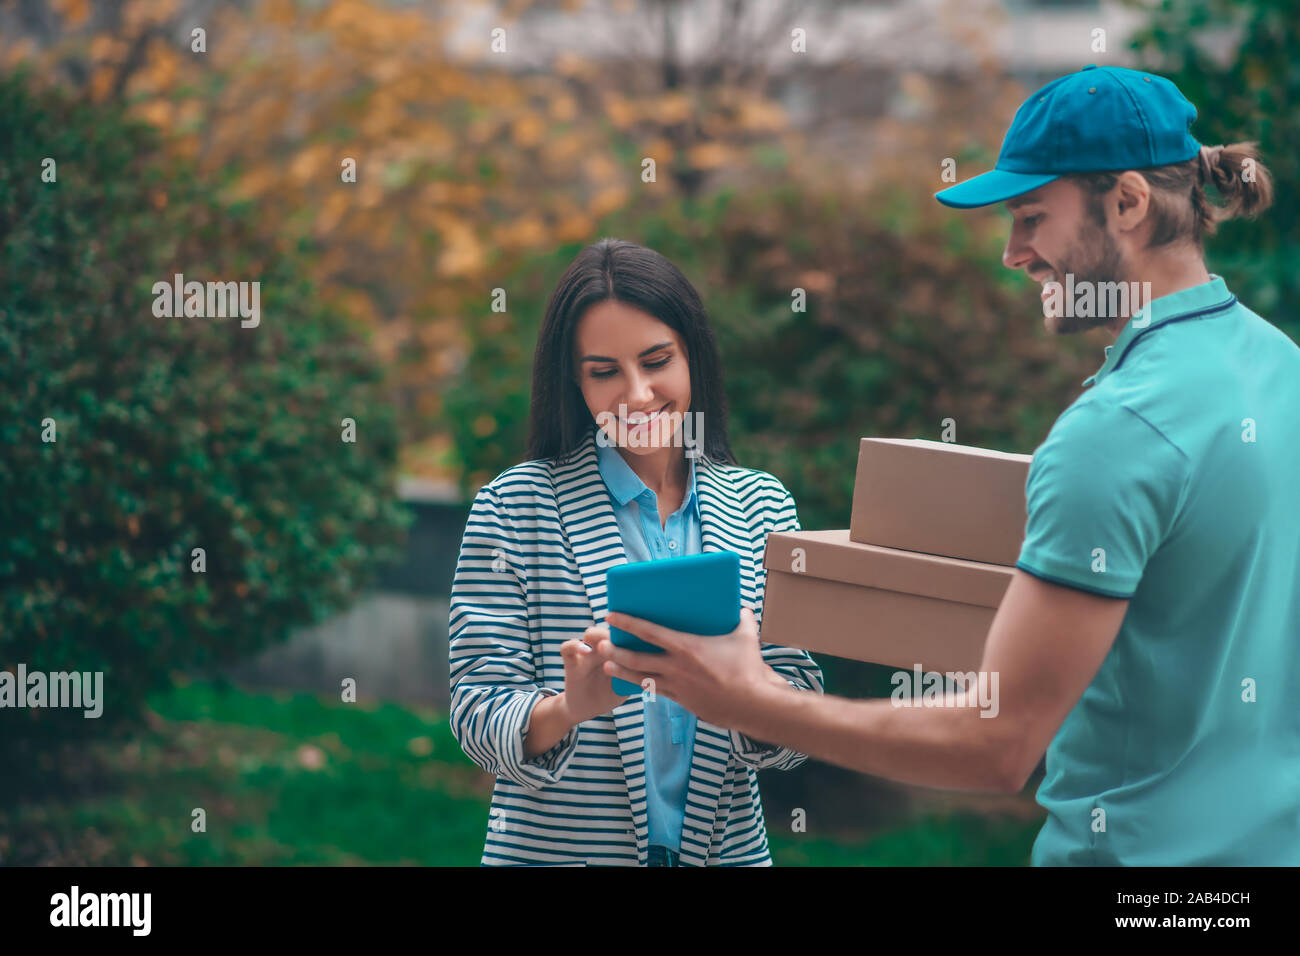 Delivery man holding tablet while standing near client Stock Photo